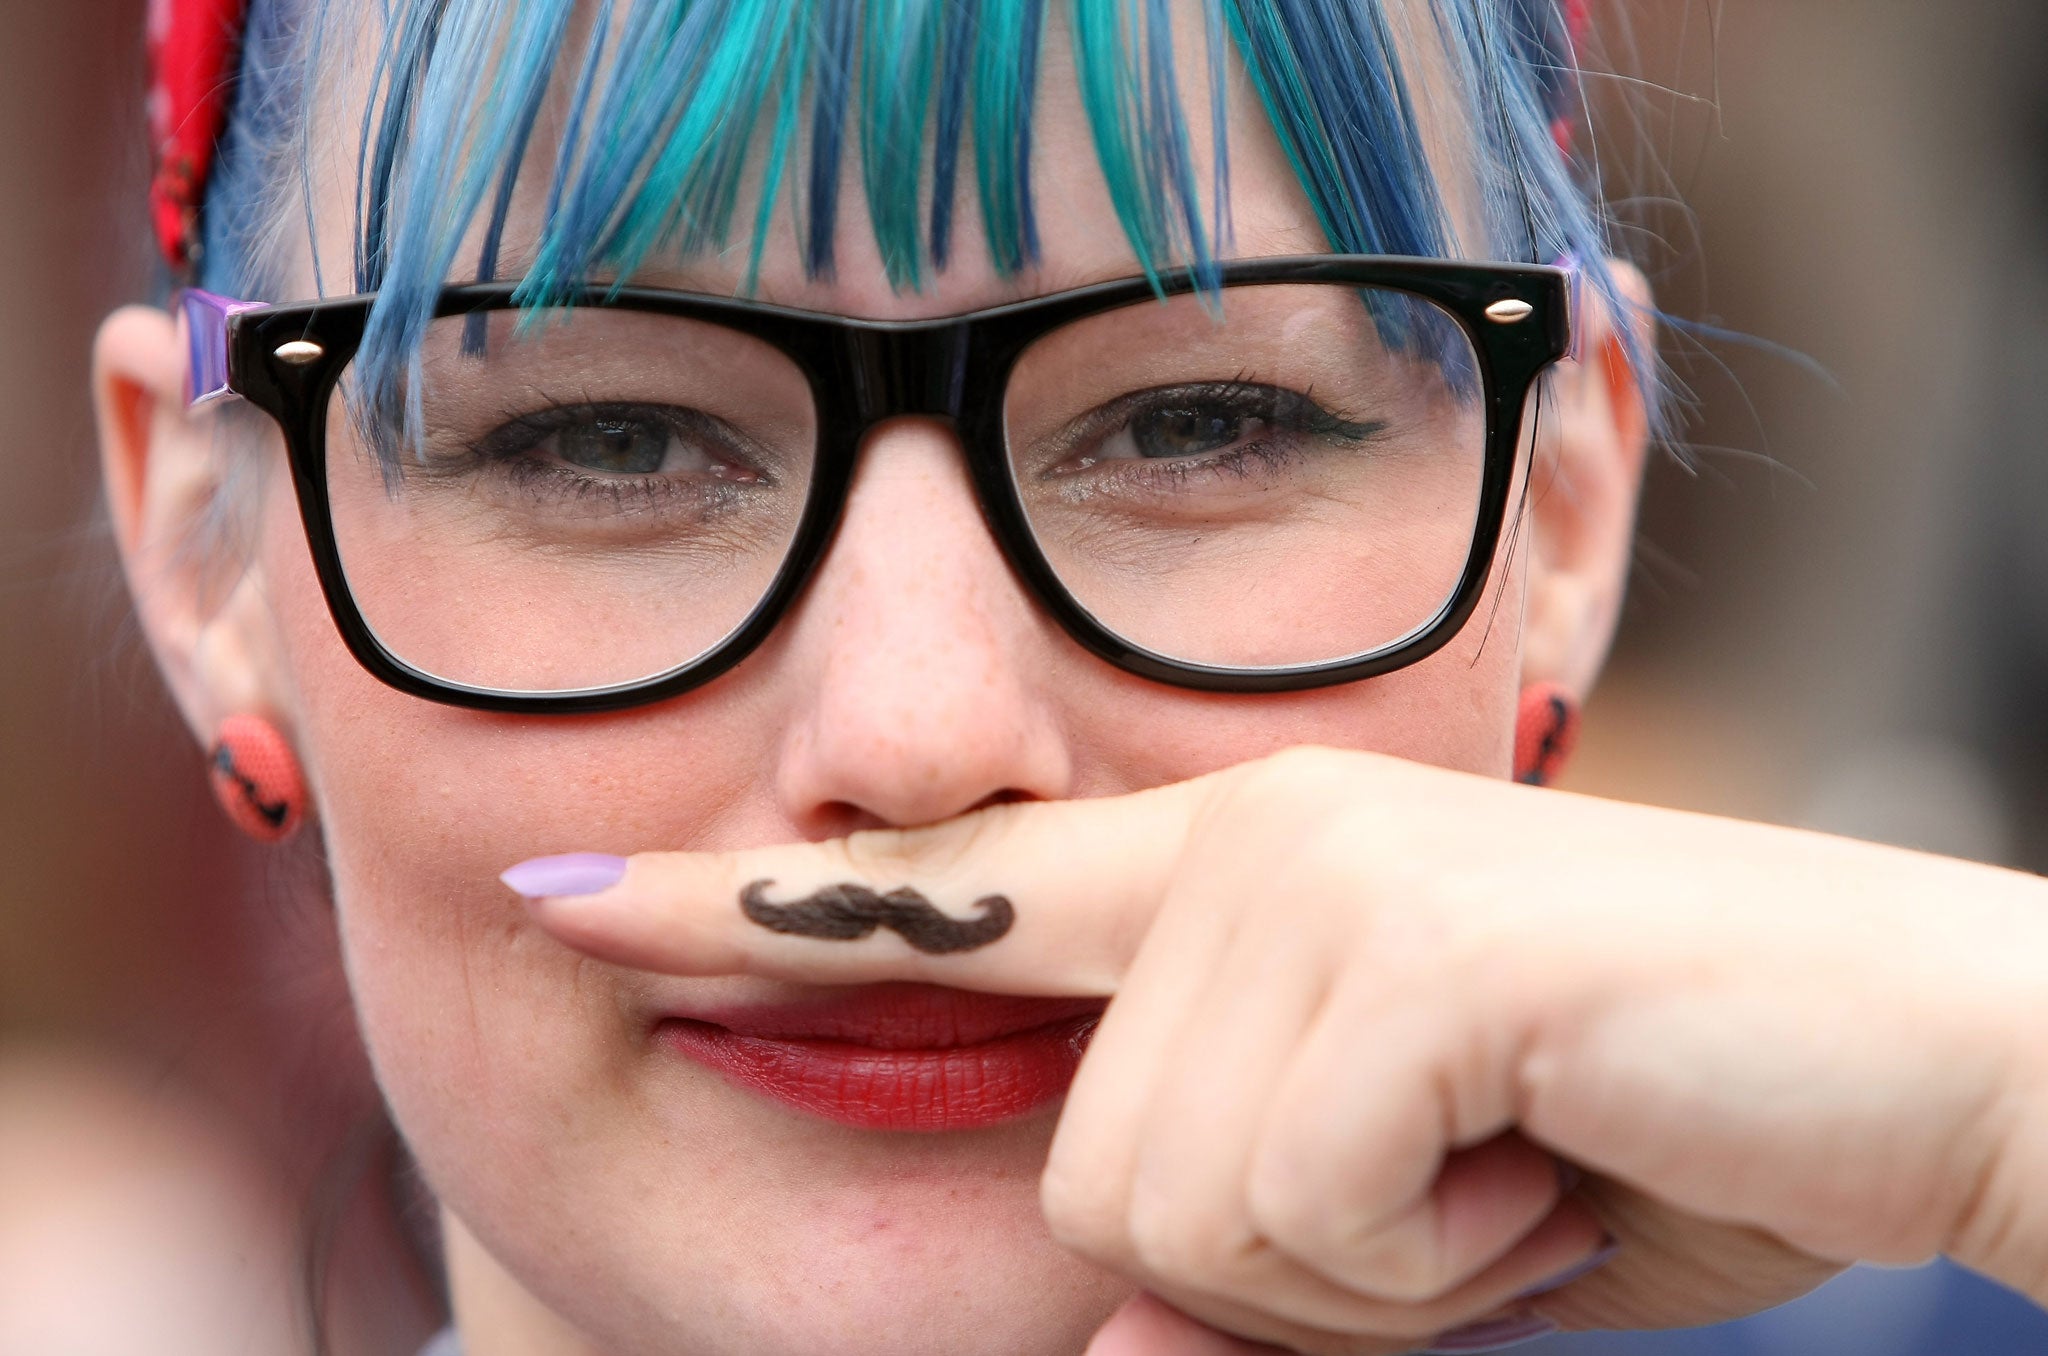 A visitor uses her finger as an ironic Hipster moustache at the second annual Hipster Olympics on July 21, 2012 in Berlin, Germany.